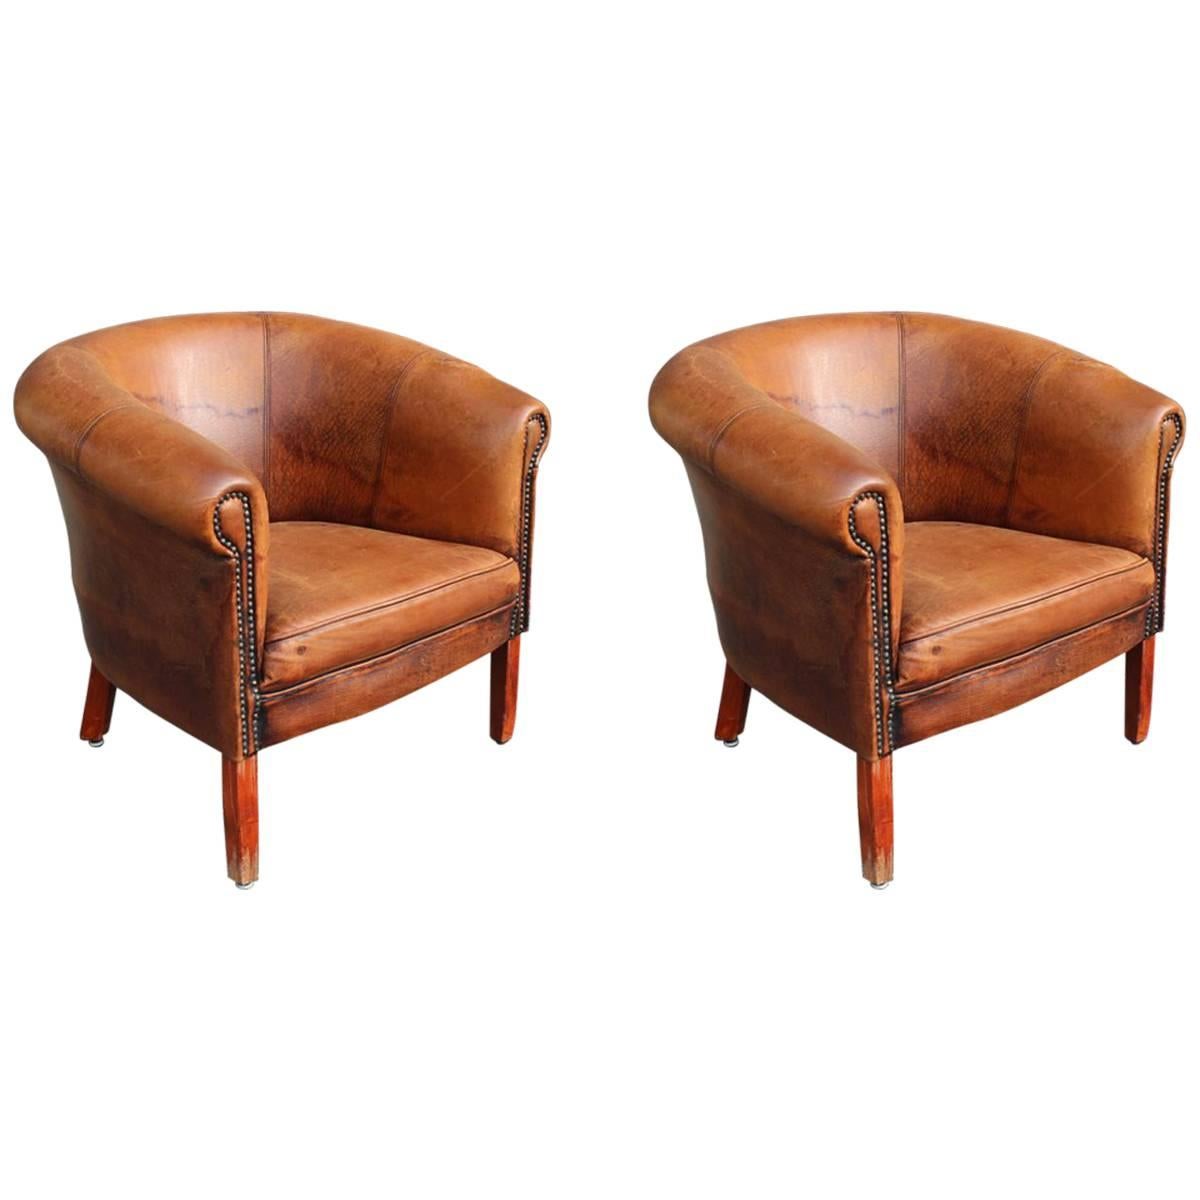 Two Club Brown Leather Armchairs, Italy 